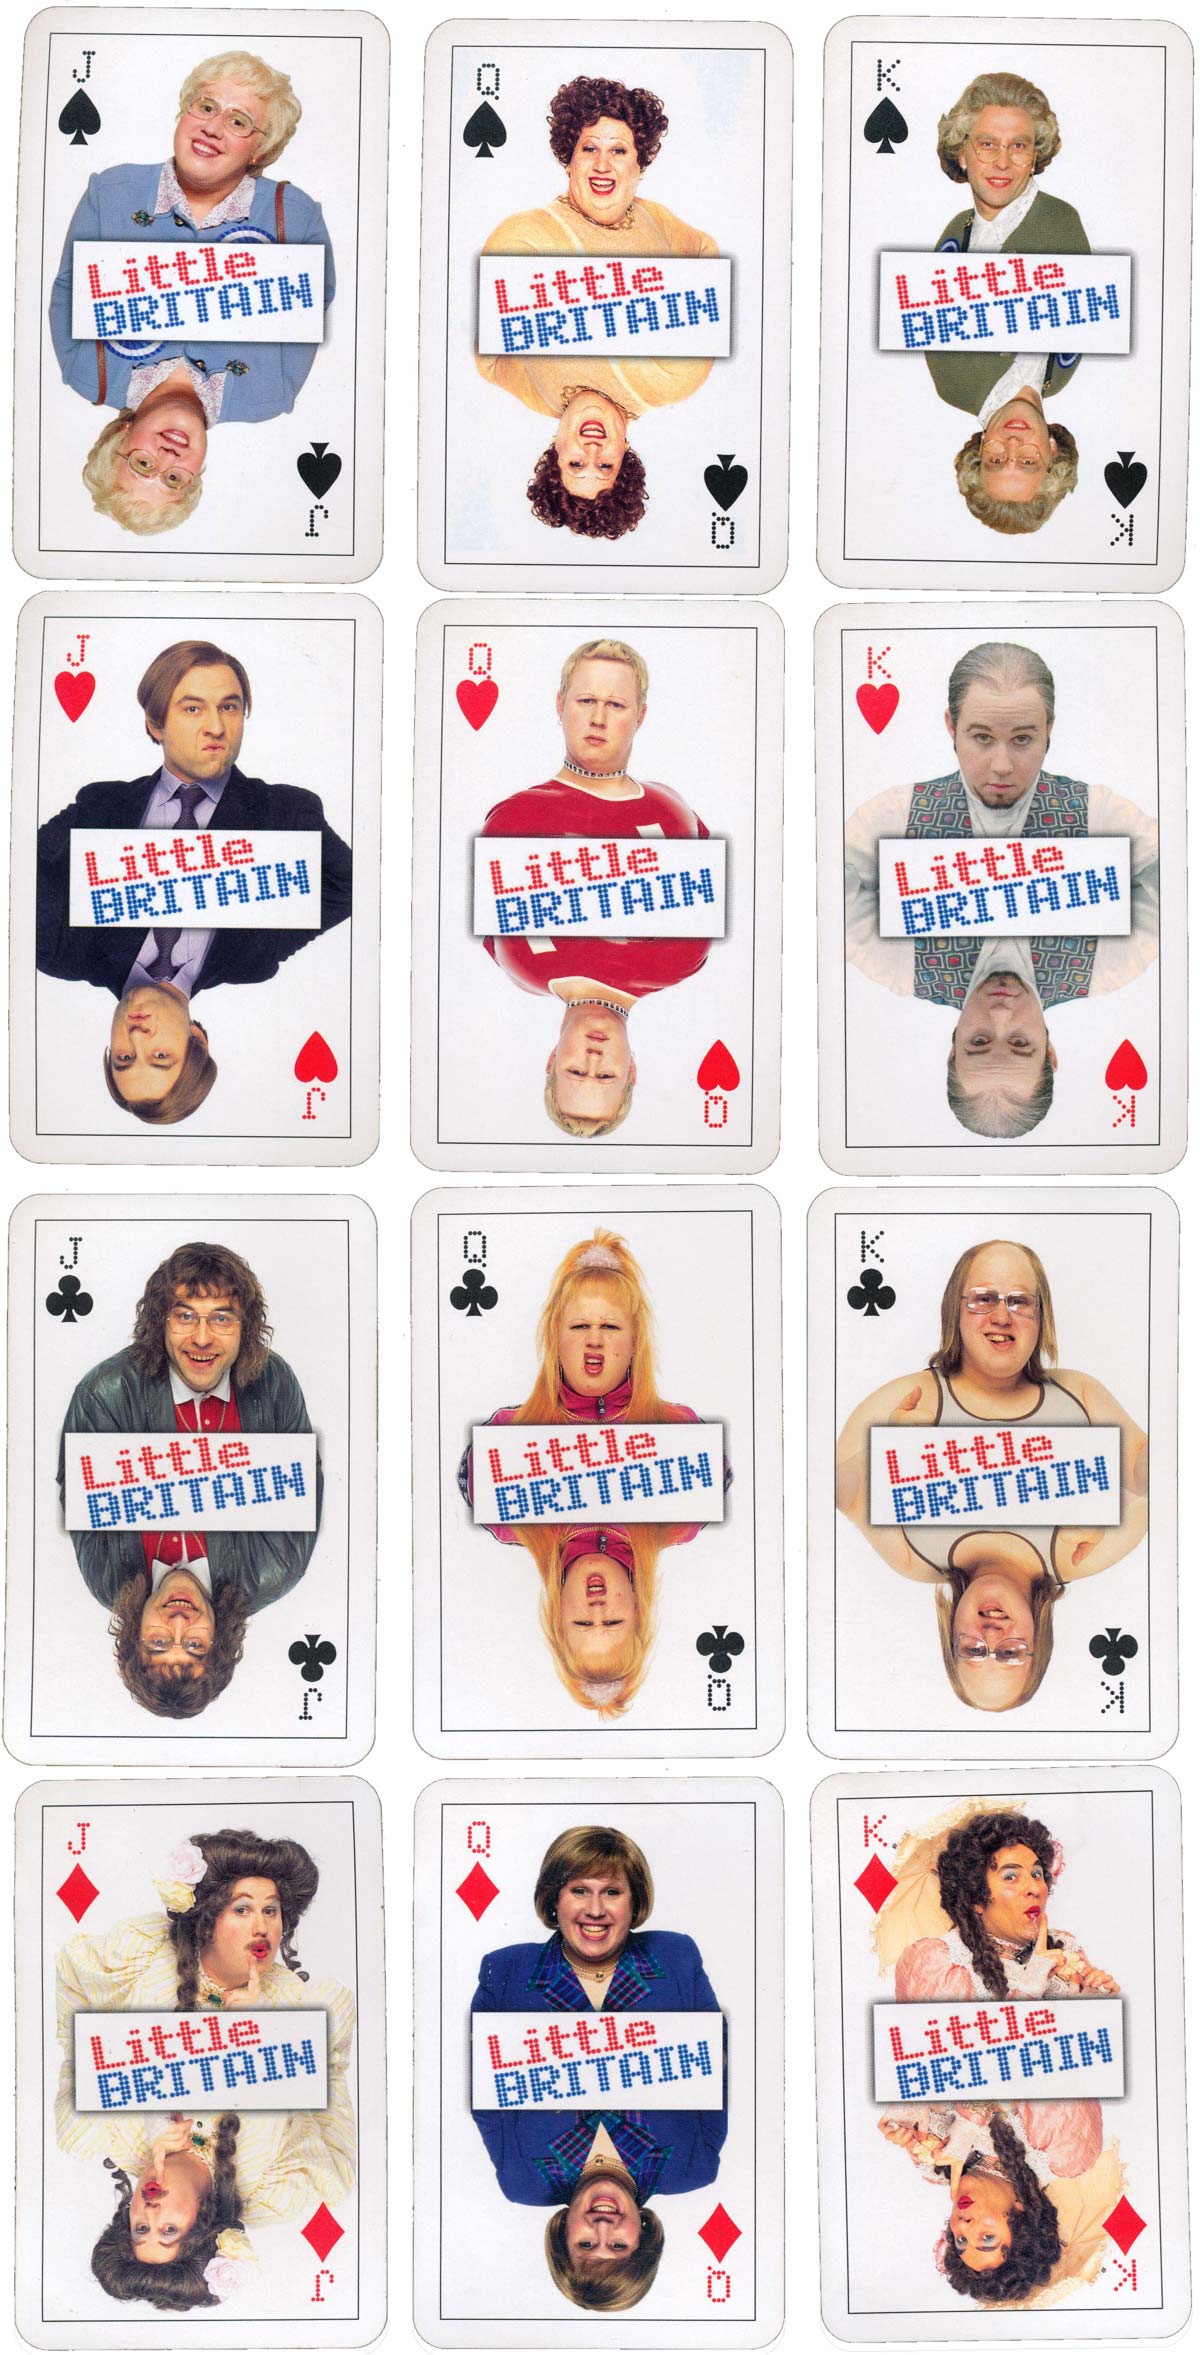 “Little Britain” fan deck published by the BBC in 2005